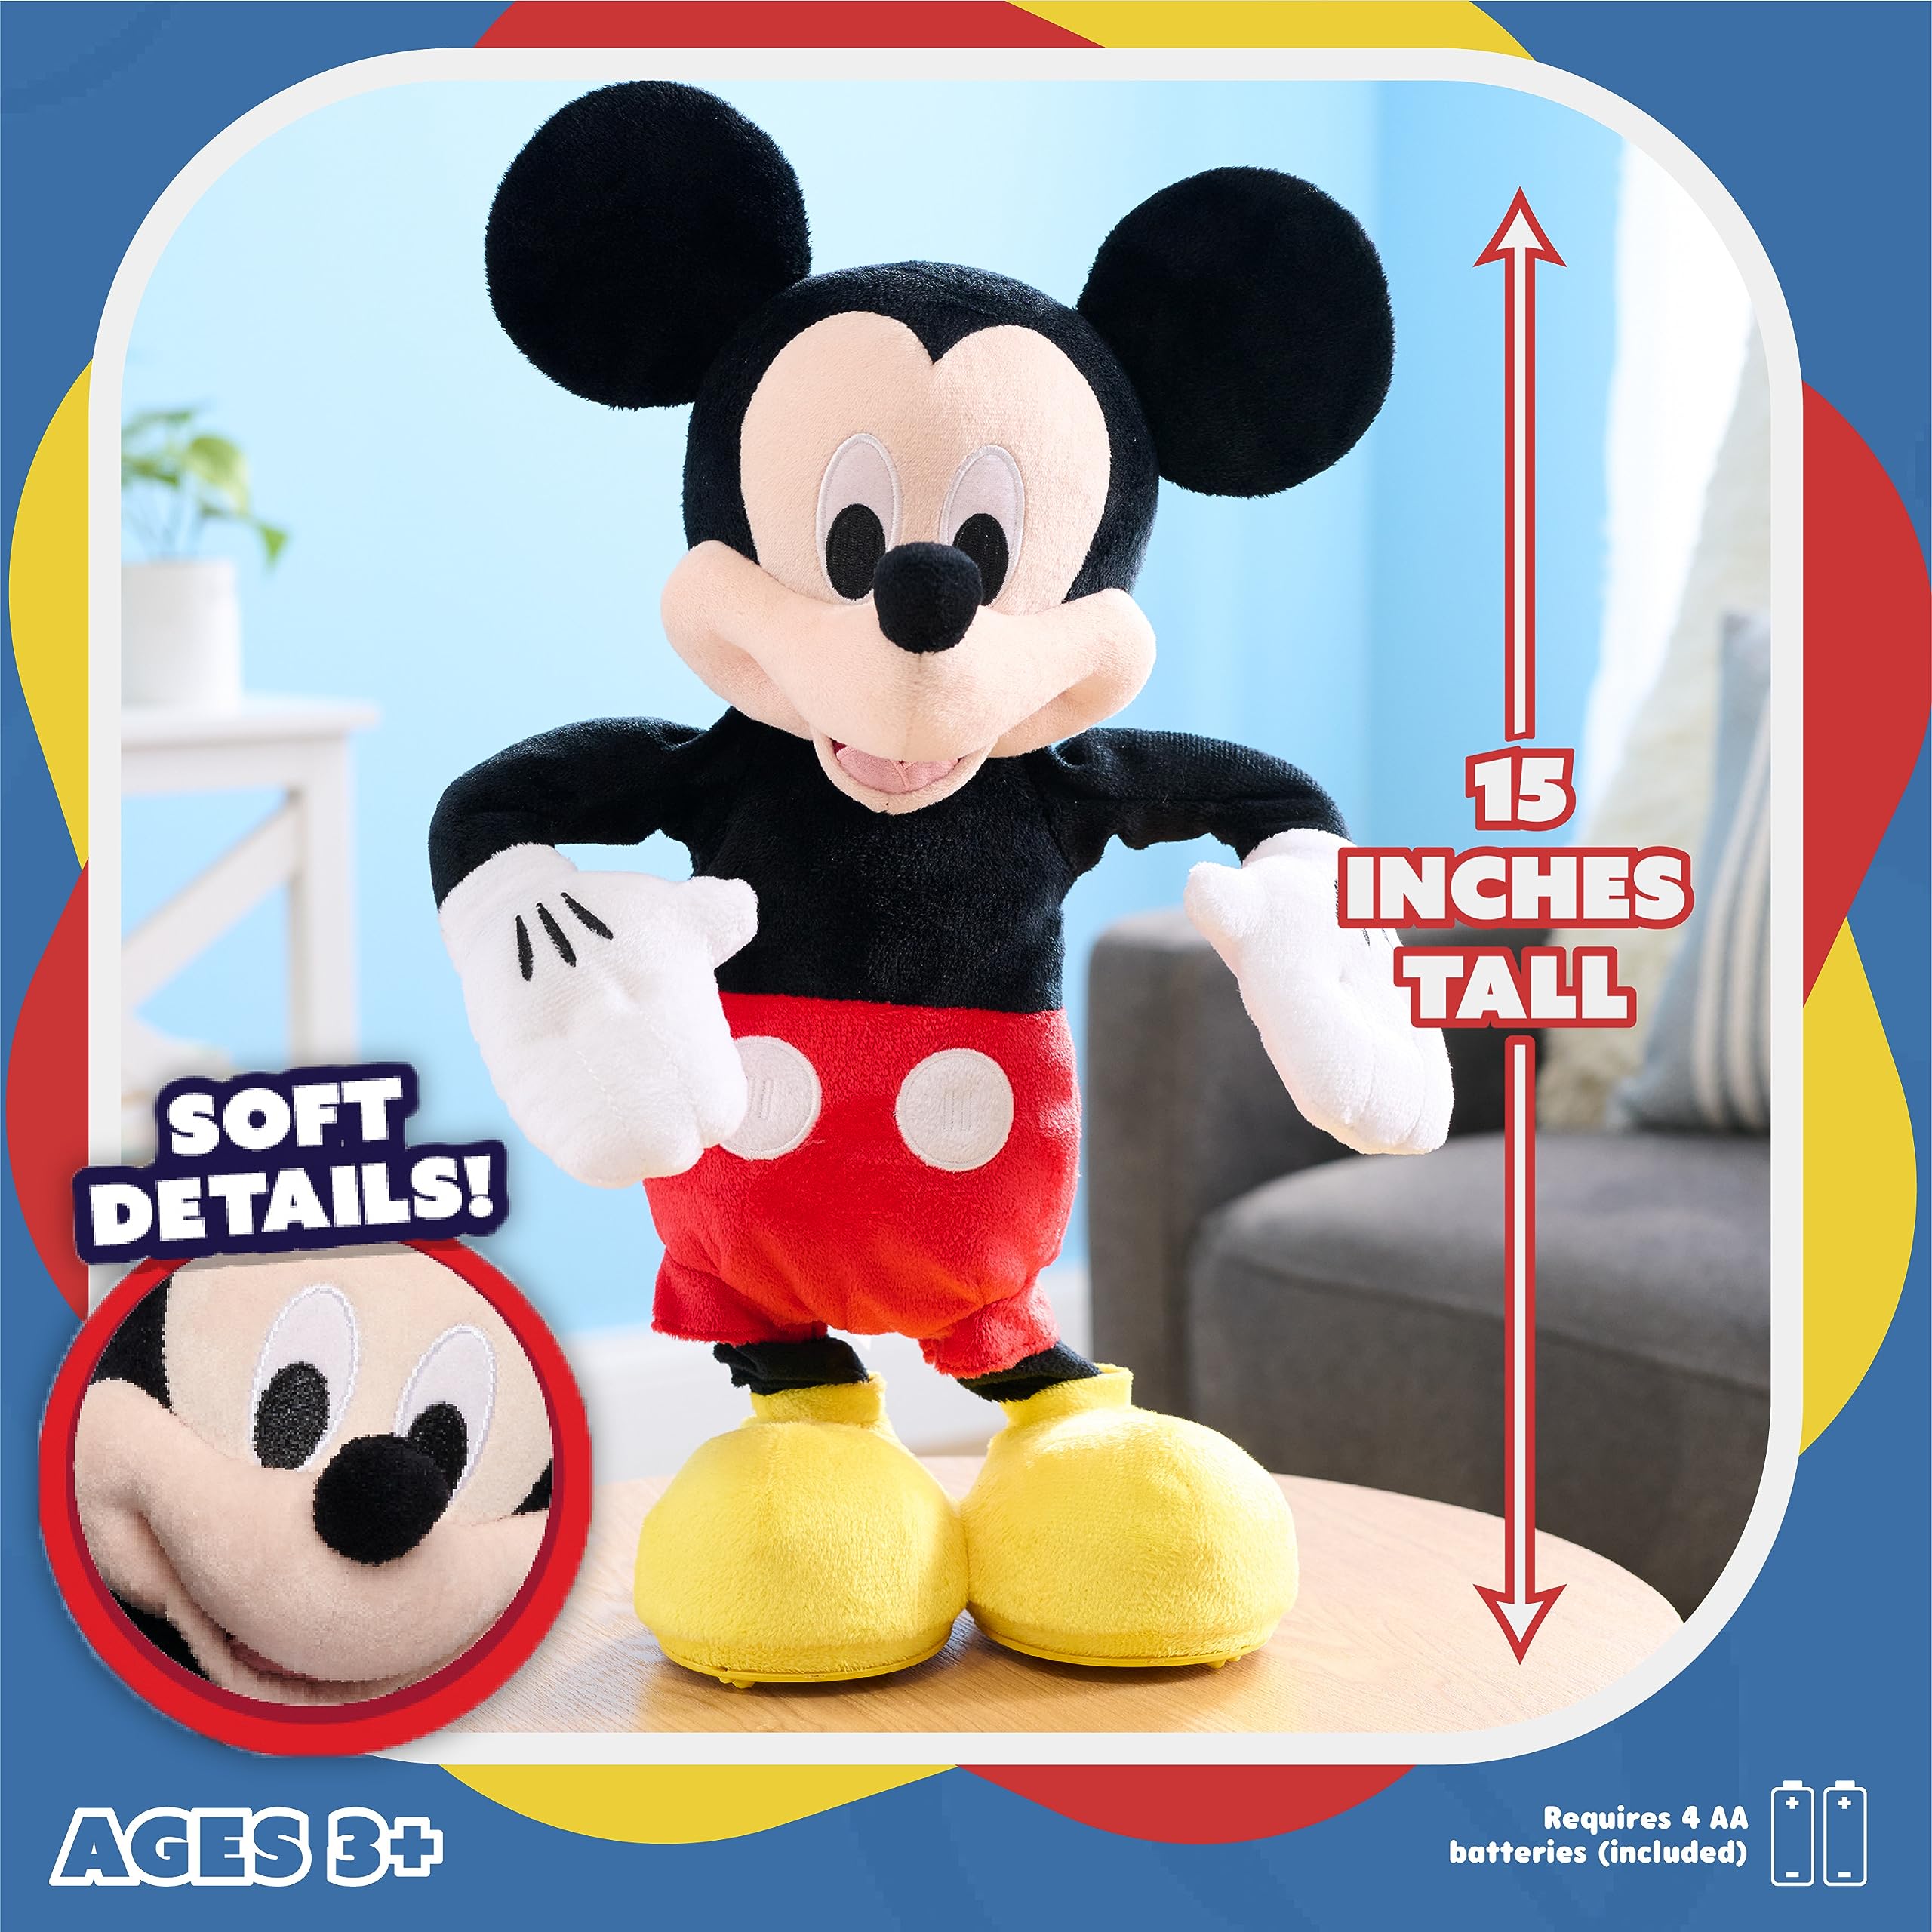 MICKEY Disney Junior Mouse Hot Diggity Dance Feature Plush Stuffed Animal, Motion, Sounds, and Games, Officially Licensed Kids Toys for Ages 3 Up by Just Play